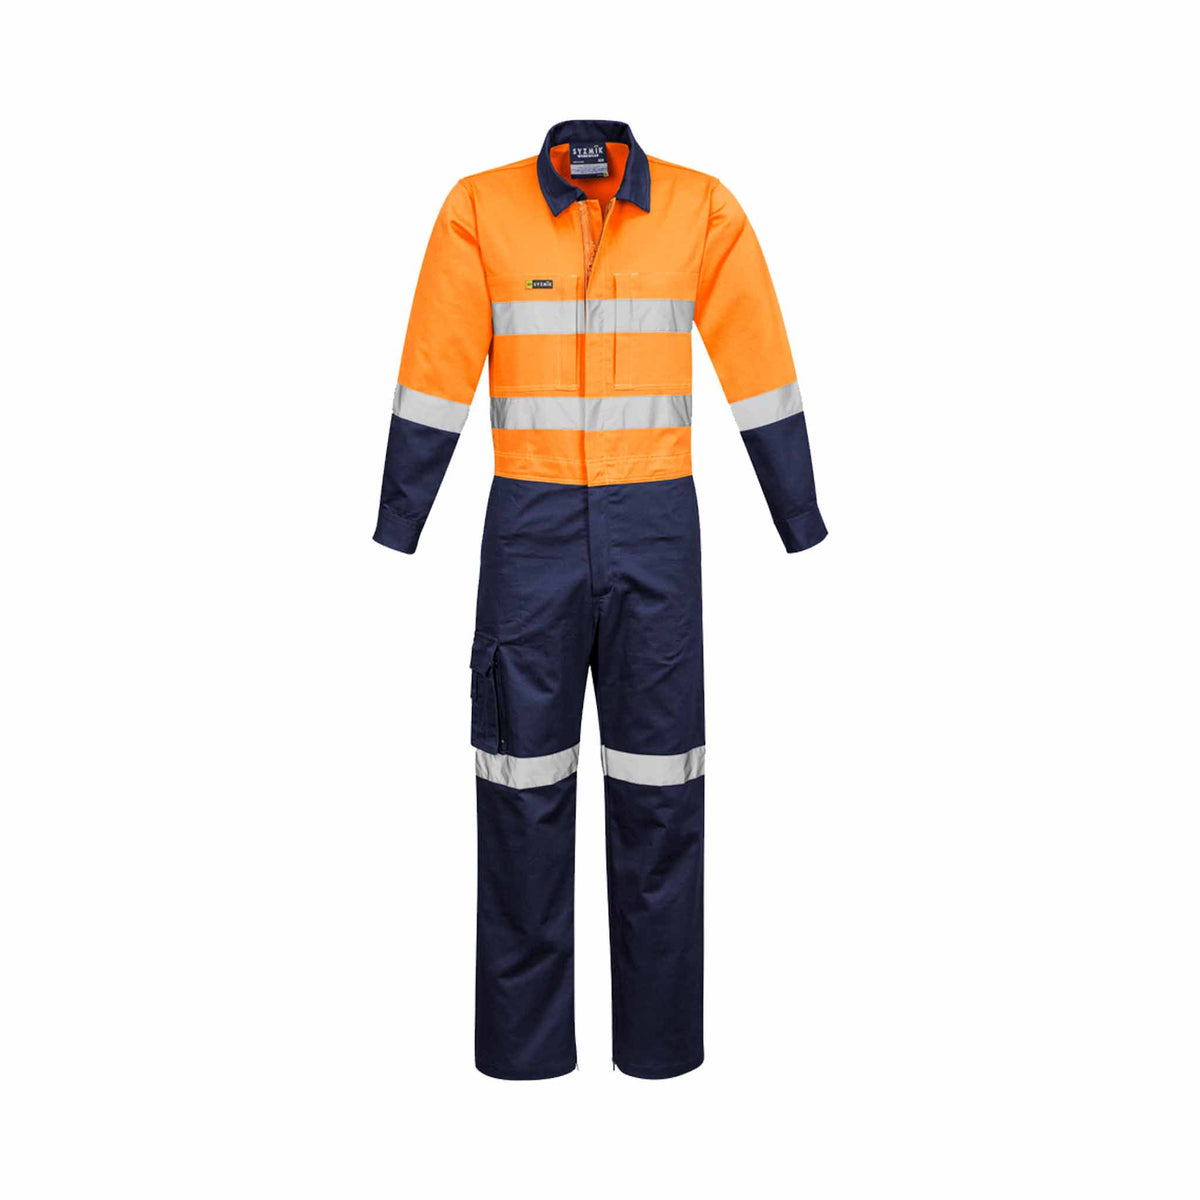 Orange navy rugged cooling taped overalls front view